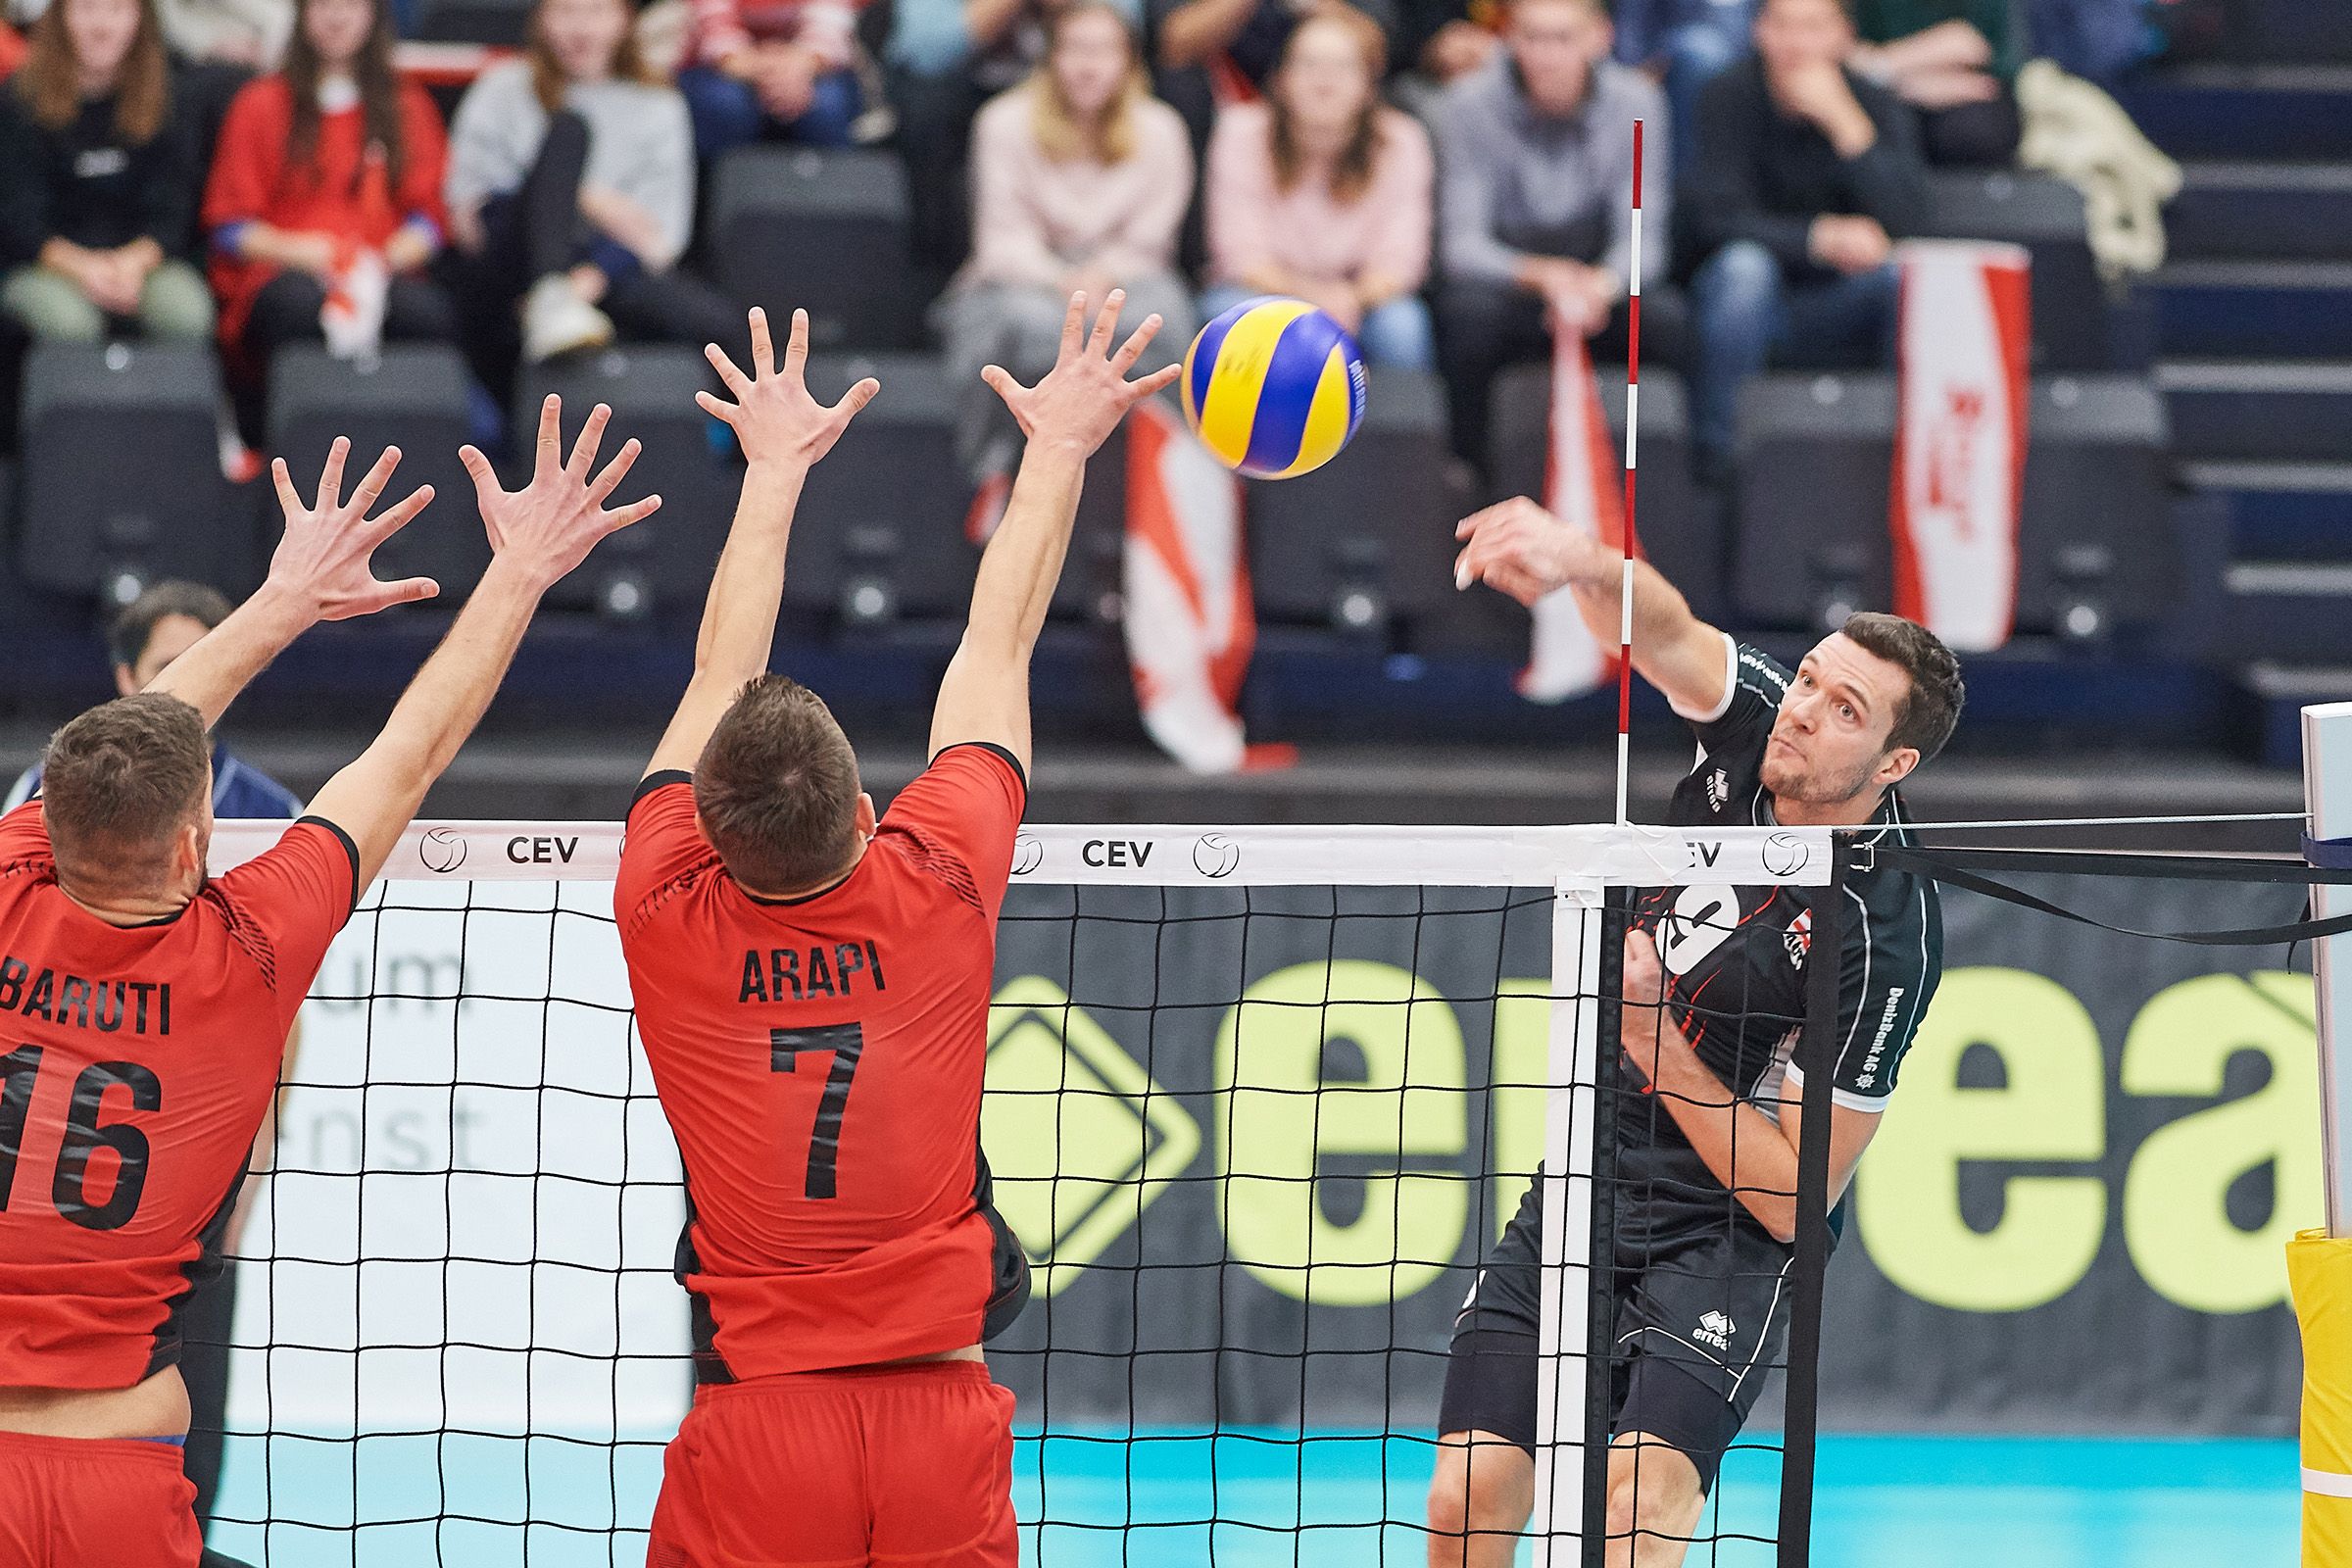 Austrian Volleyball ace Thomas Zass says goodbye to competitive sport | CEV